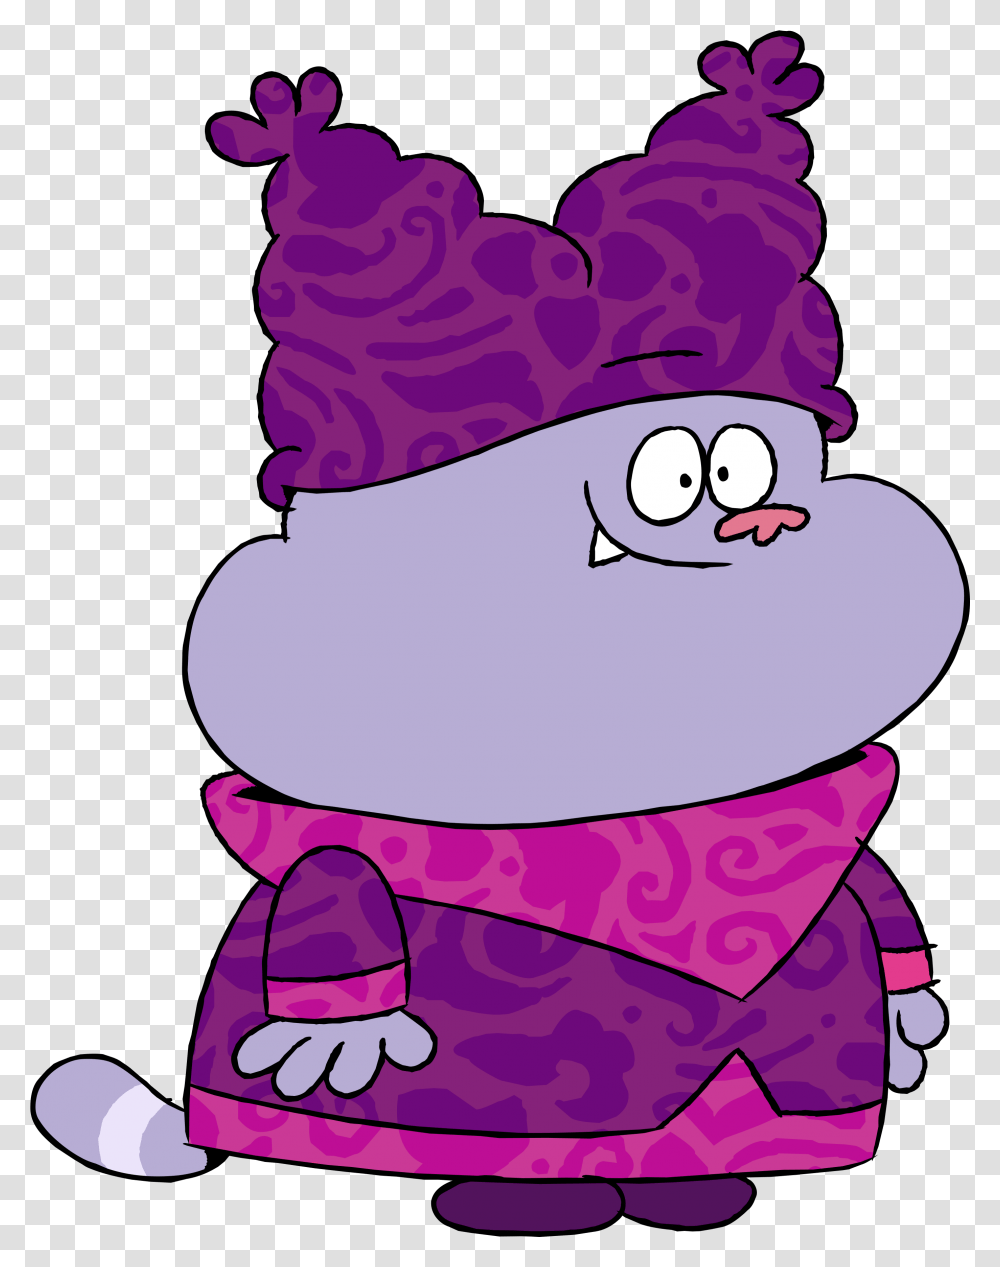 Chowder Chowder Cartoon, Clothing, Sweets, Food, Graphics Transparent Png